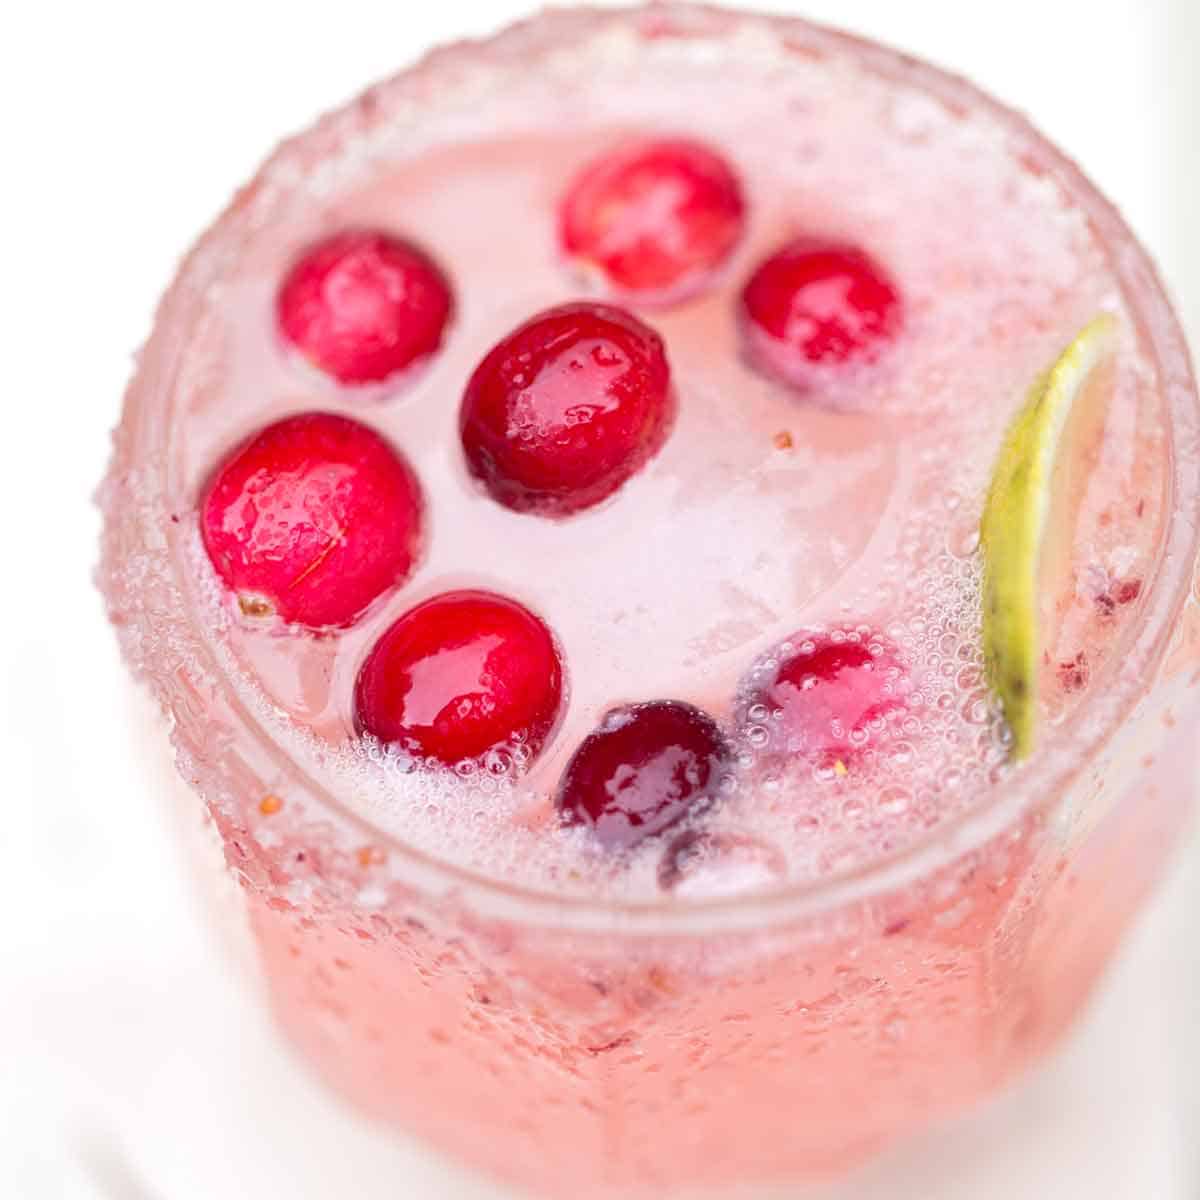 Fizzy pink cranberry paloma cocktail in a glass with fresh cranberries.